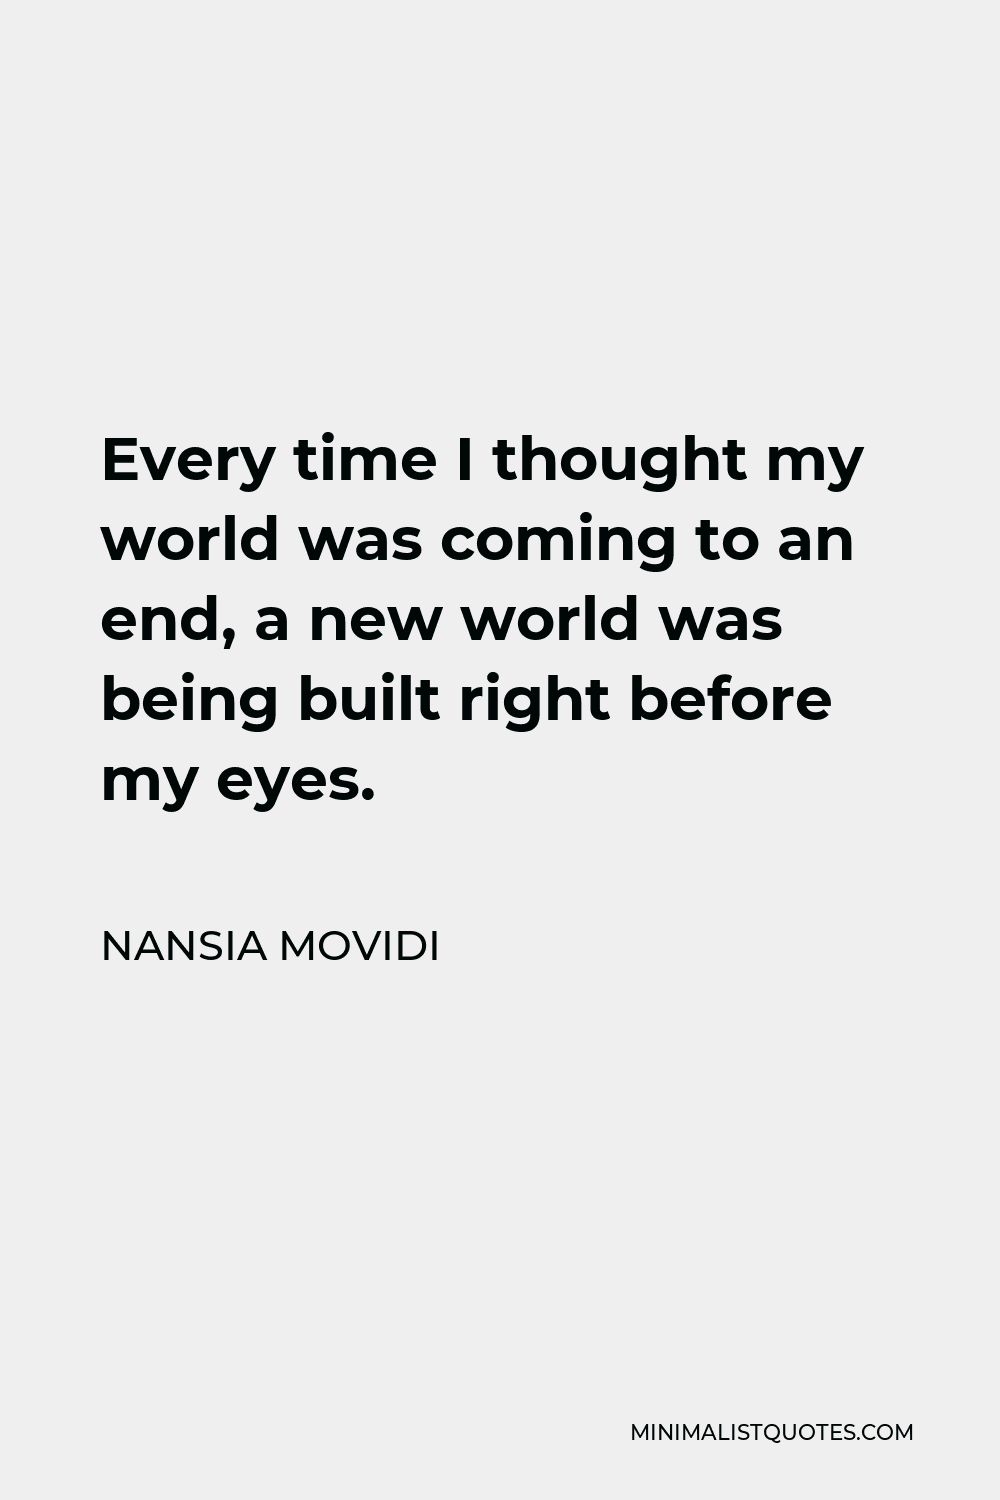 Nansia Movidi Quote - Every time I thought my world was coming to an end, a new world was being built right before my eyes.